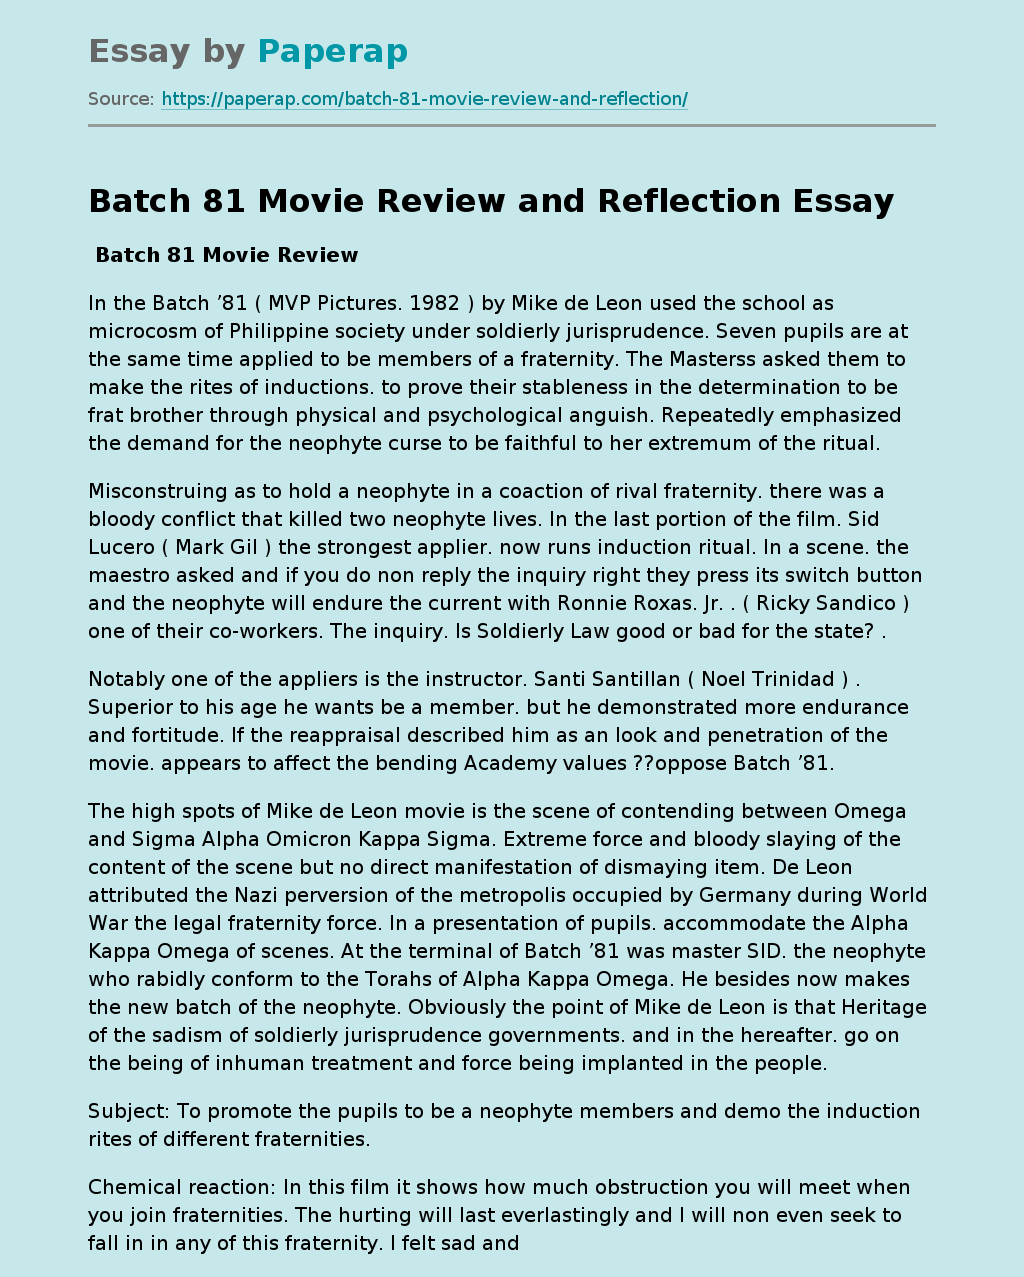 Batch 81 Movie Review and Reflection